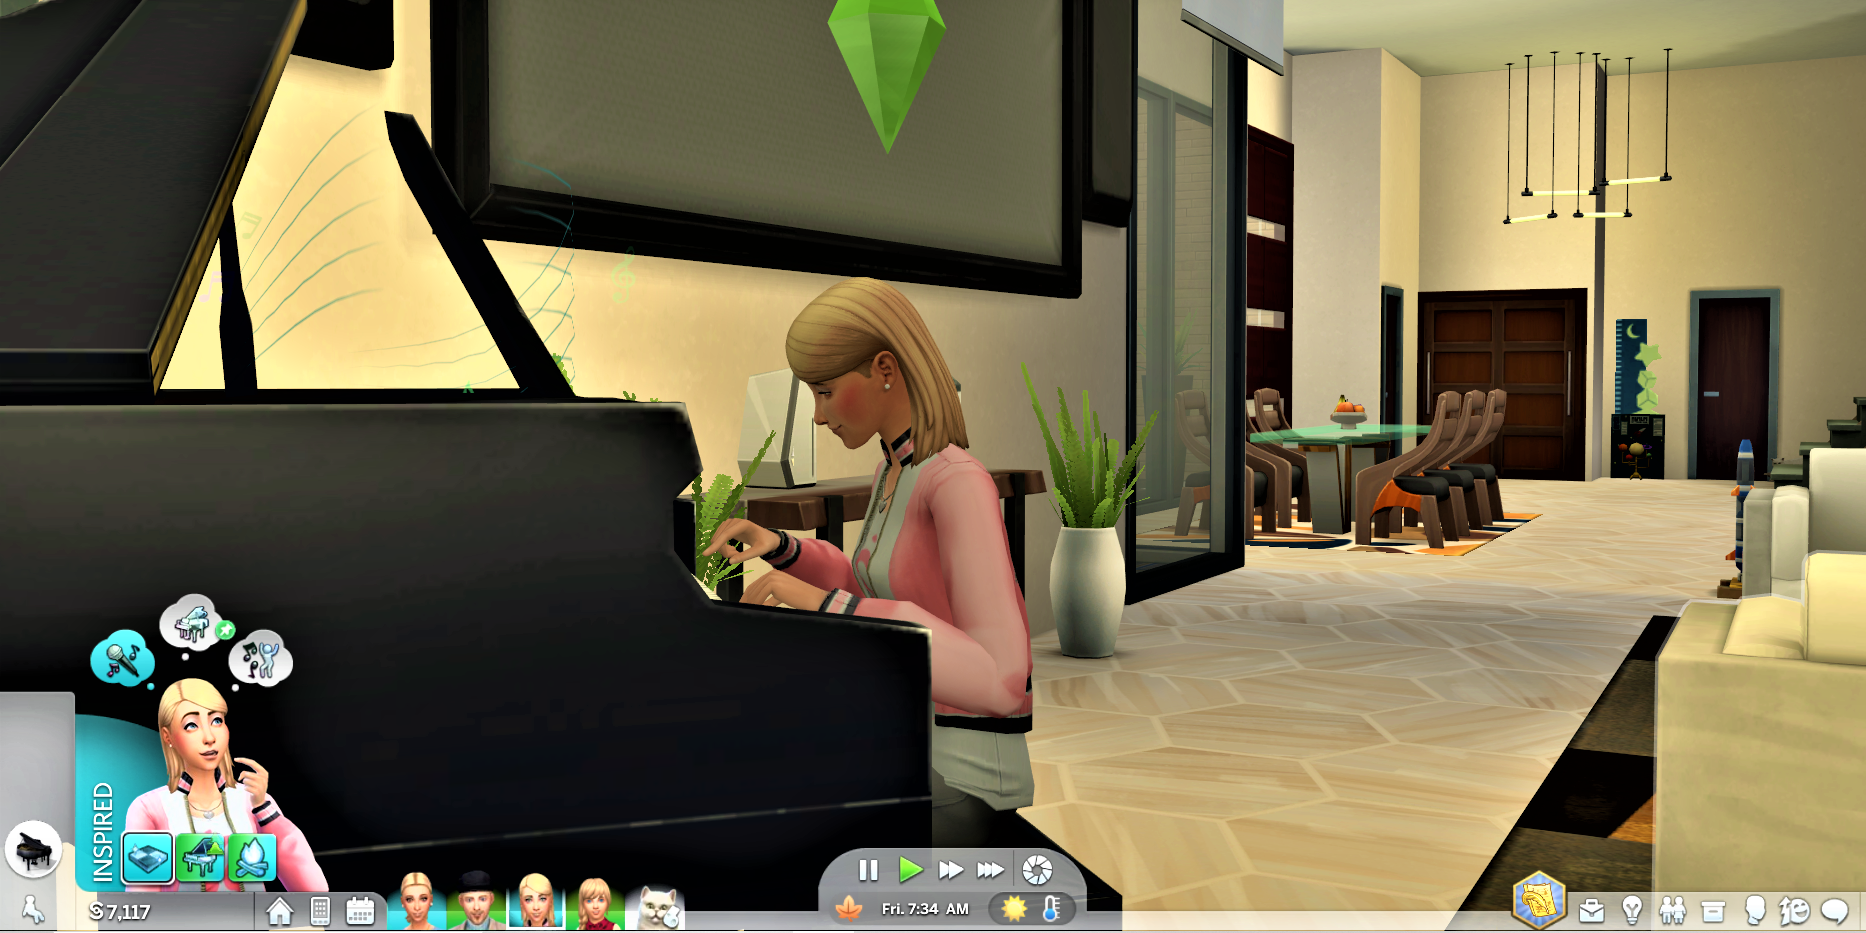 Sofia Bjergsen playing the piano in The Sims 4, with the UI visible on-screen